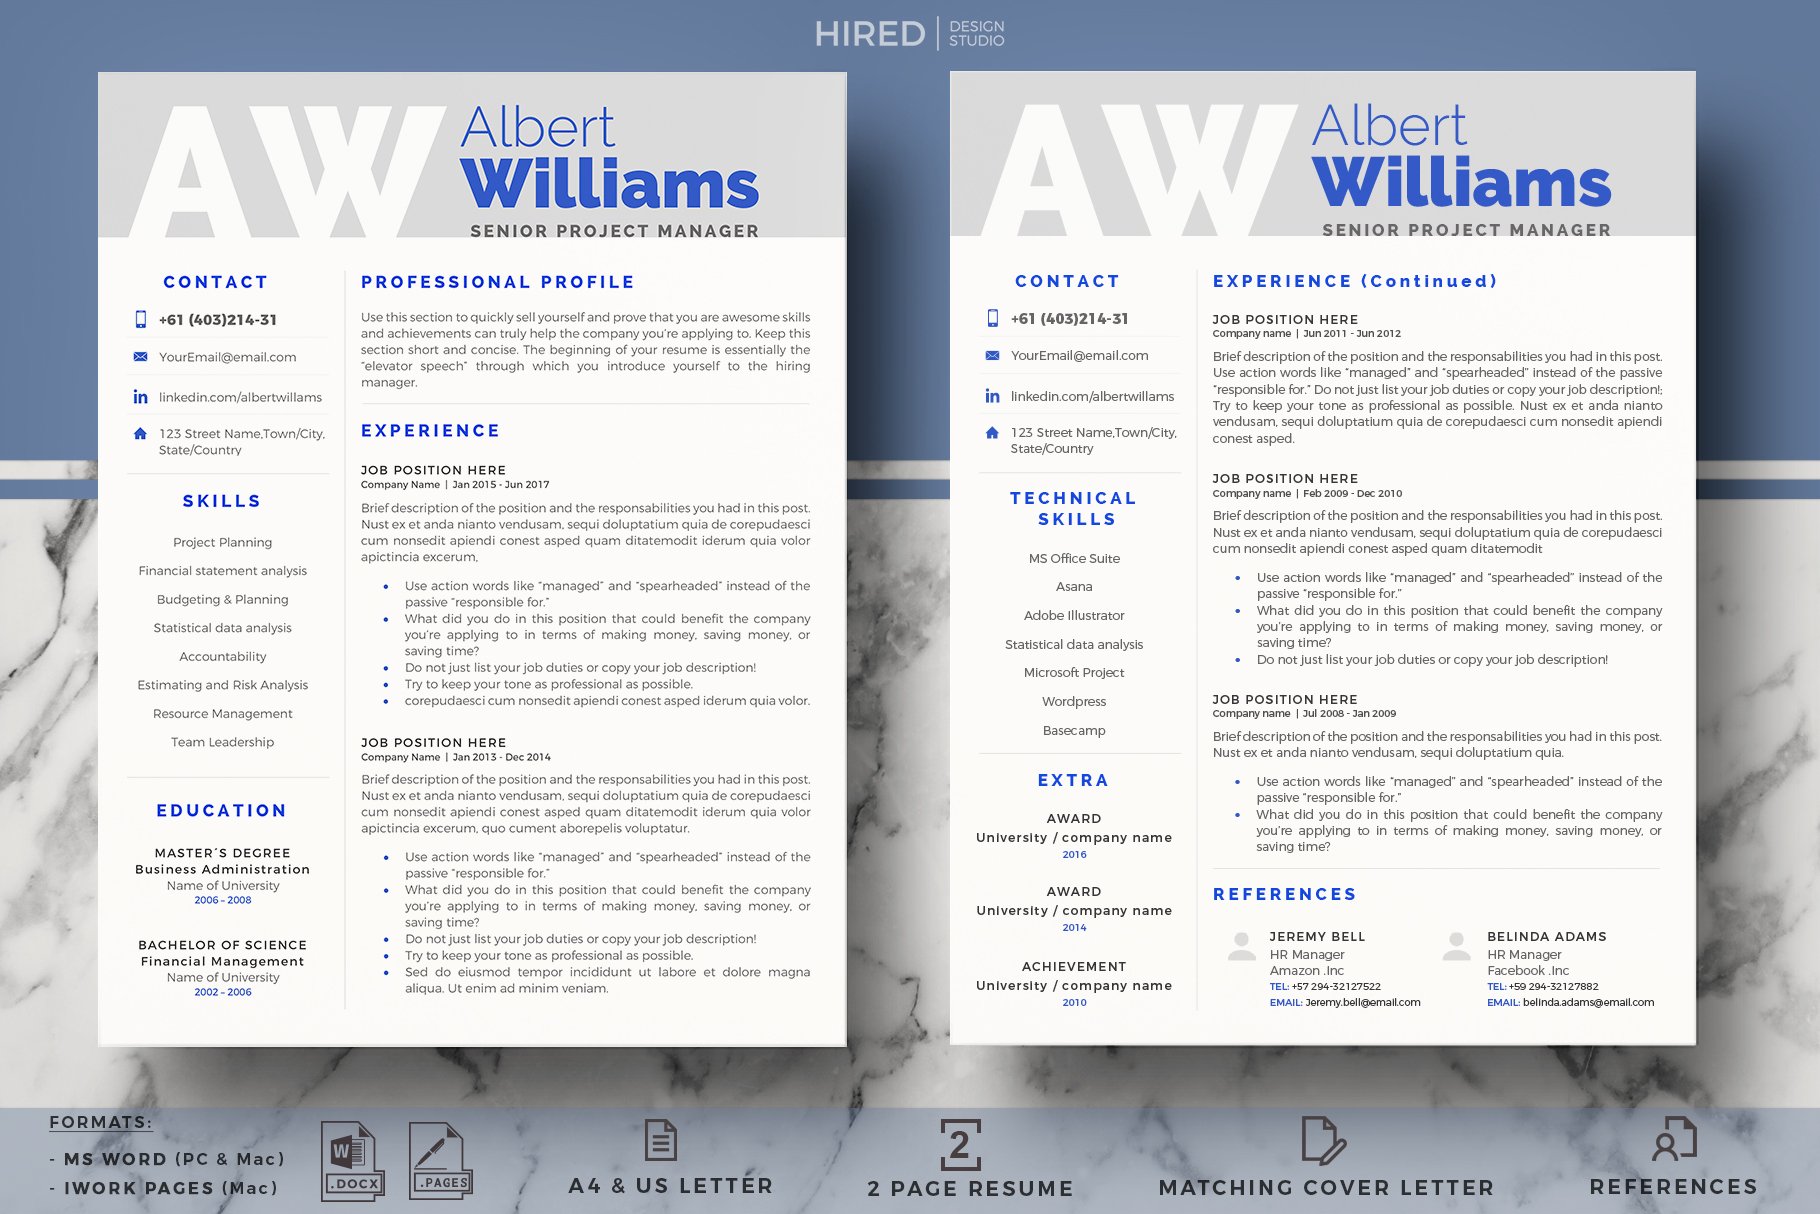 Project Manager Resume, CV templates preview image.